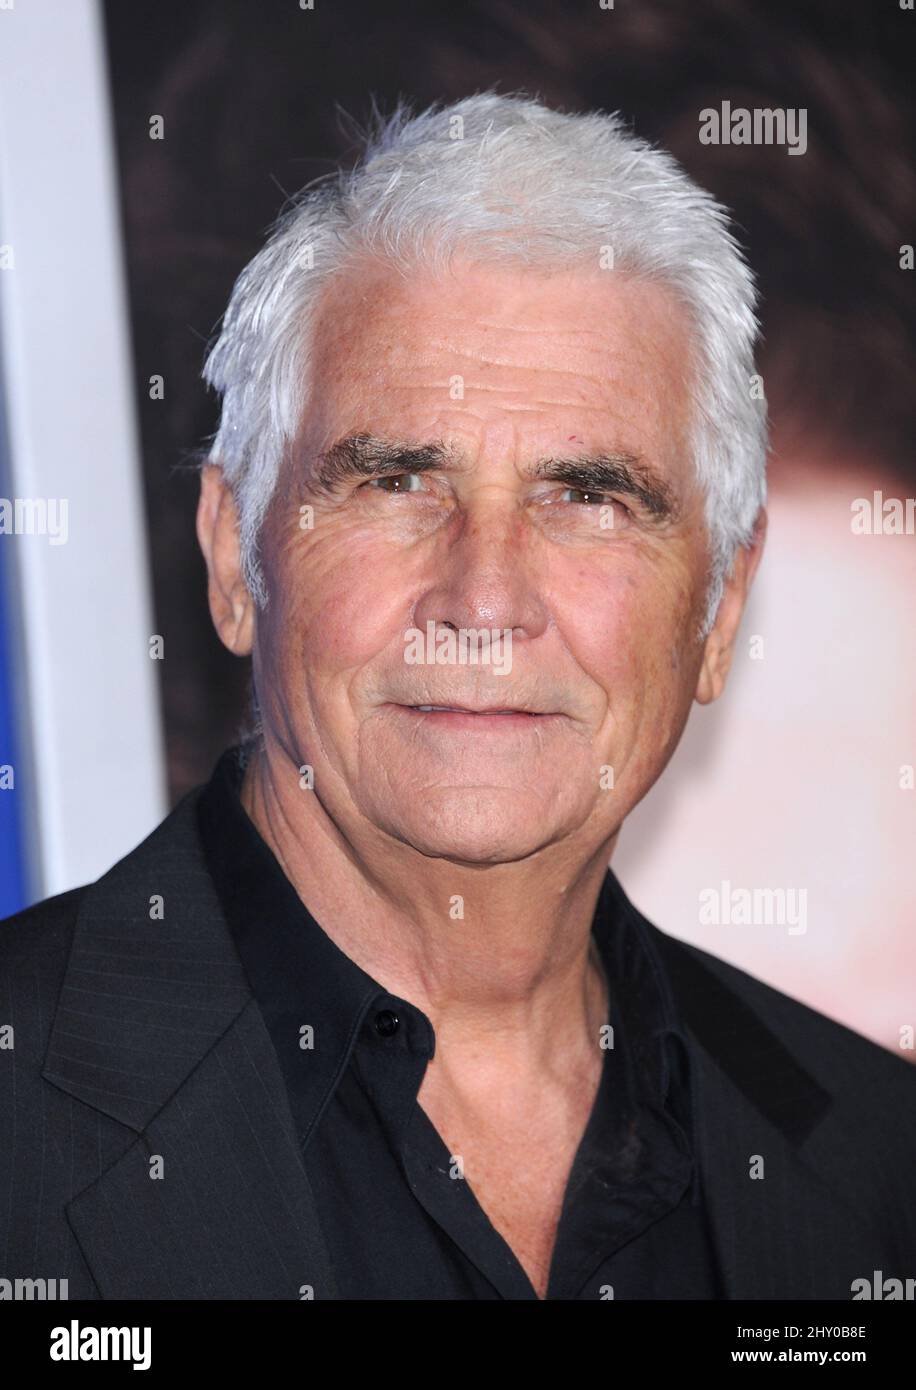 James Brolin attending the premiere of 'The Guilt Trip' in Los Angeles, California. Stock Photo